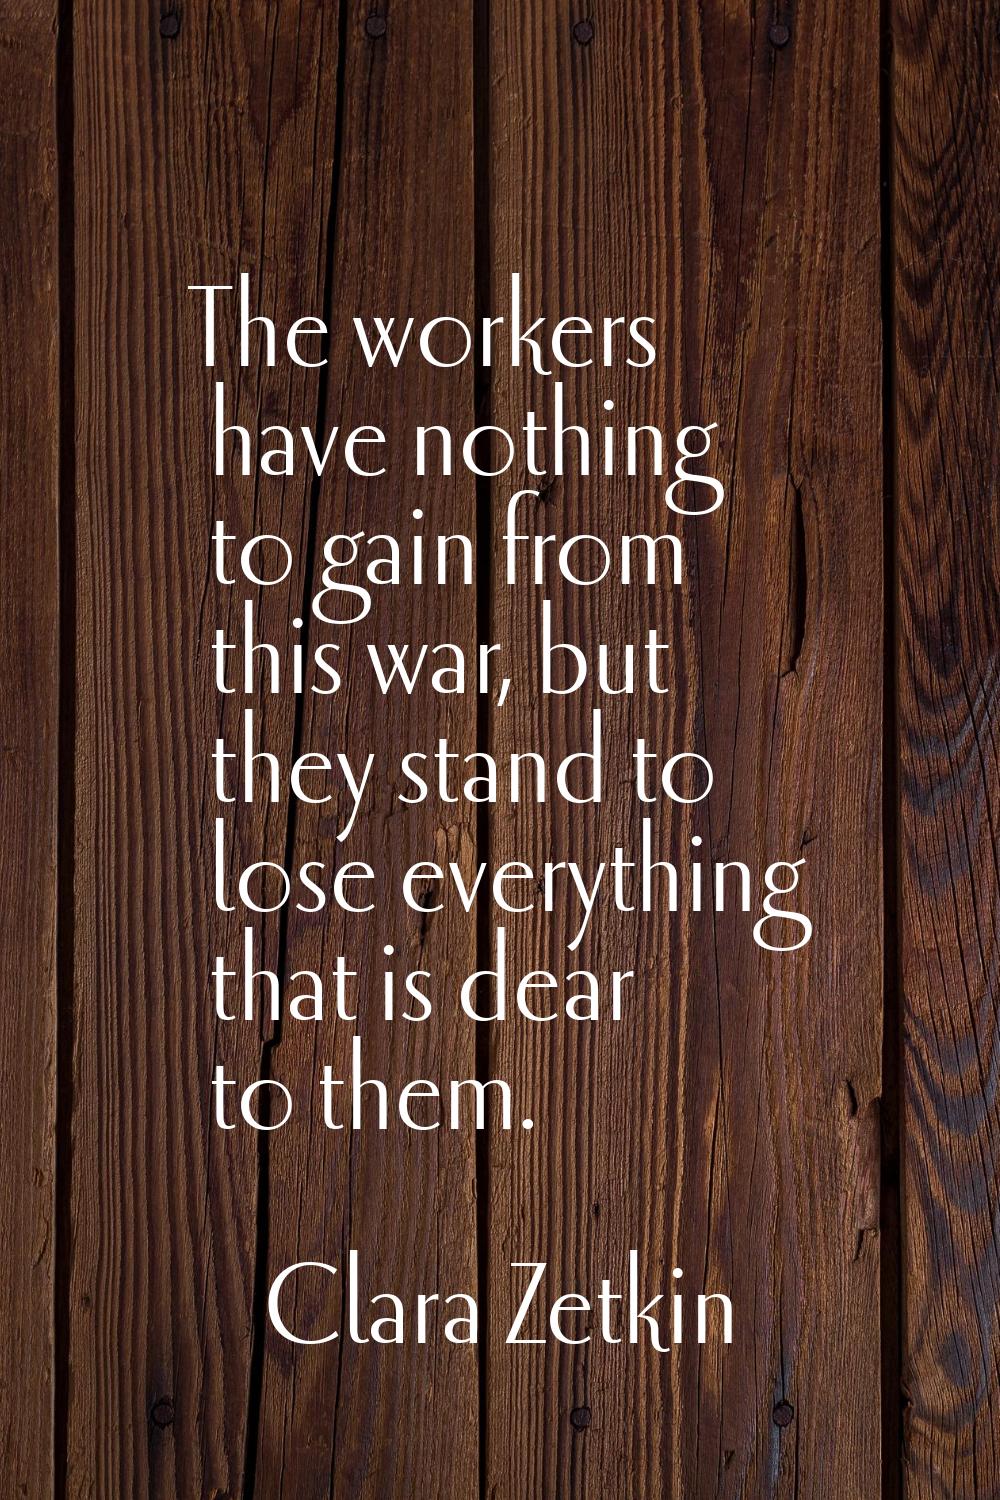 The workers have nothing to gain from this war, but they stand to lose everything that is dear to t